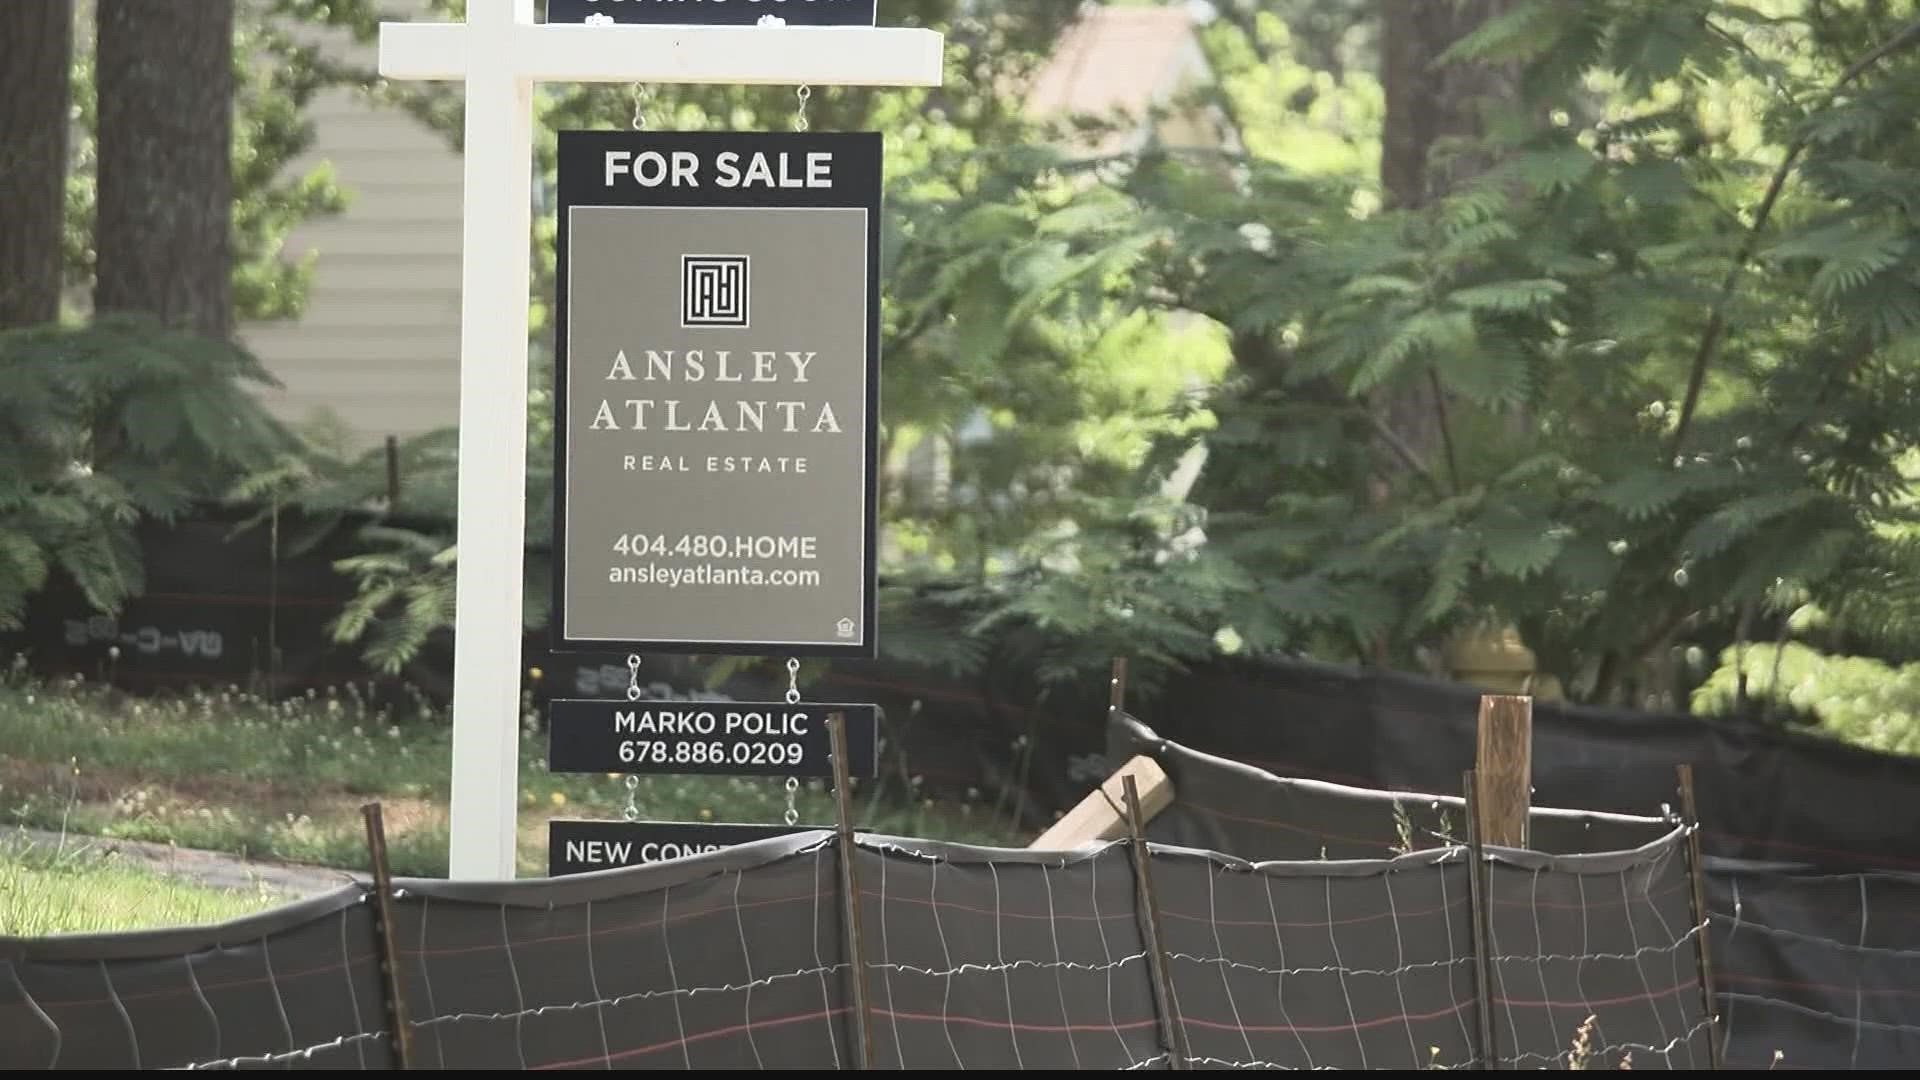 11Alive spoke to a local real estate expert about how women can utilize fair housing laws when home buying.